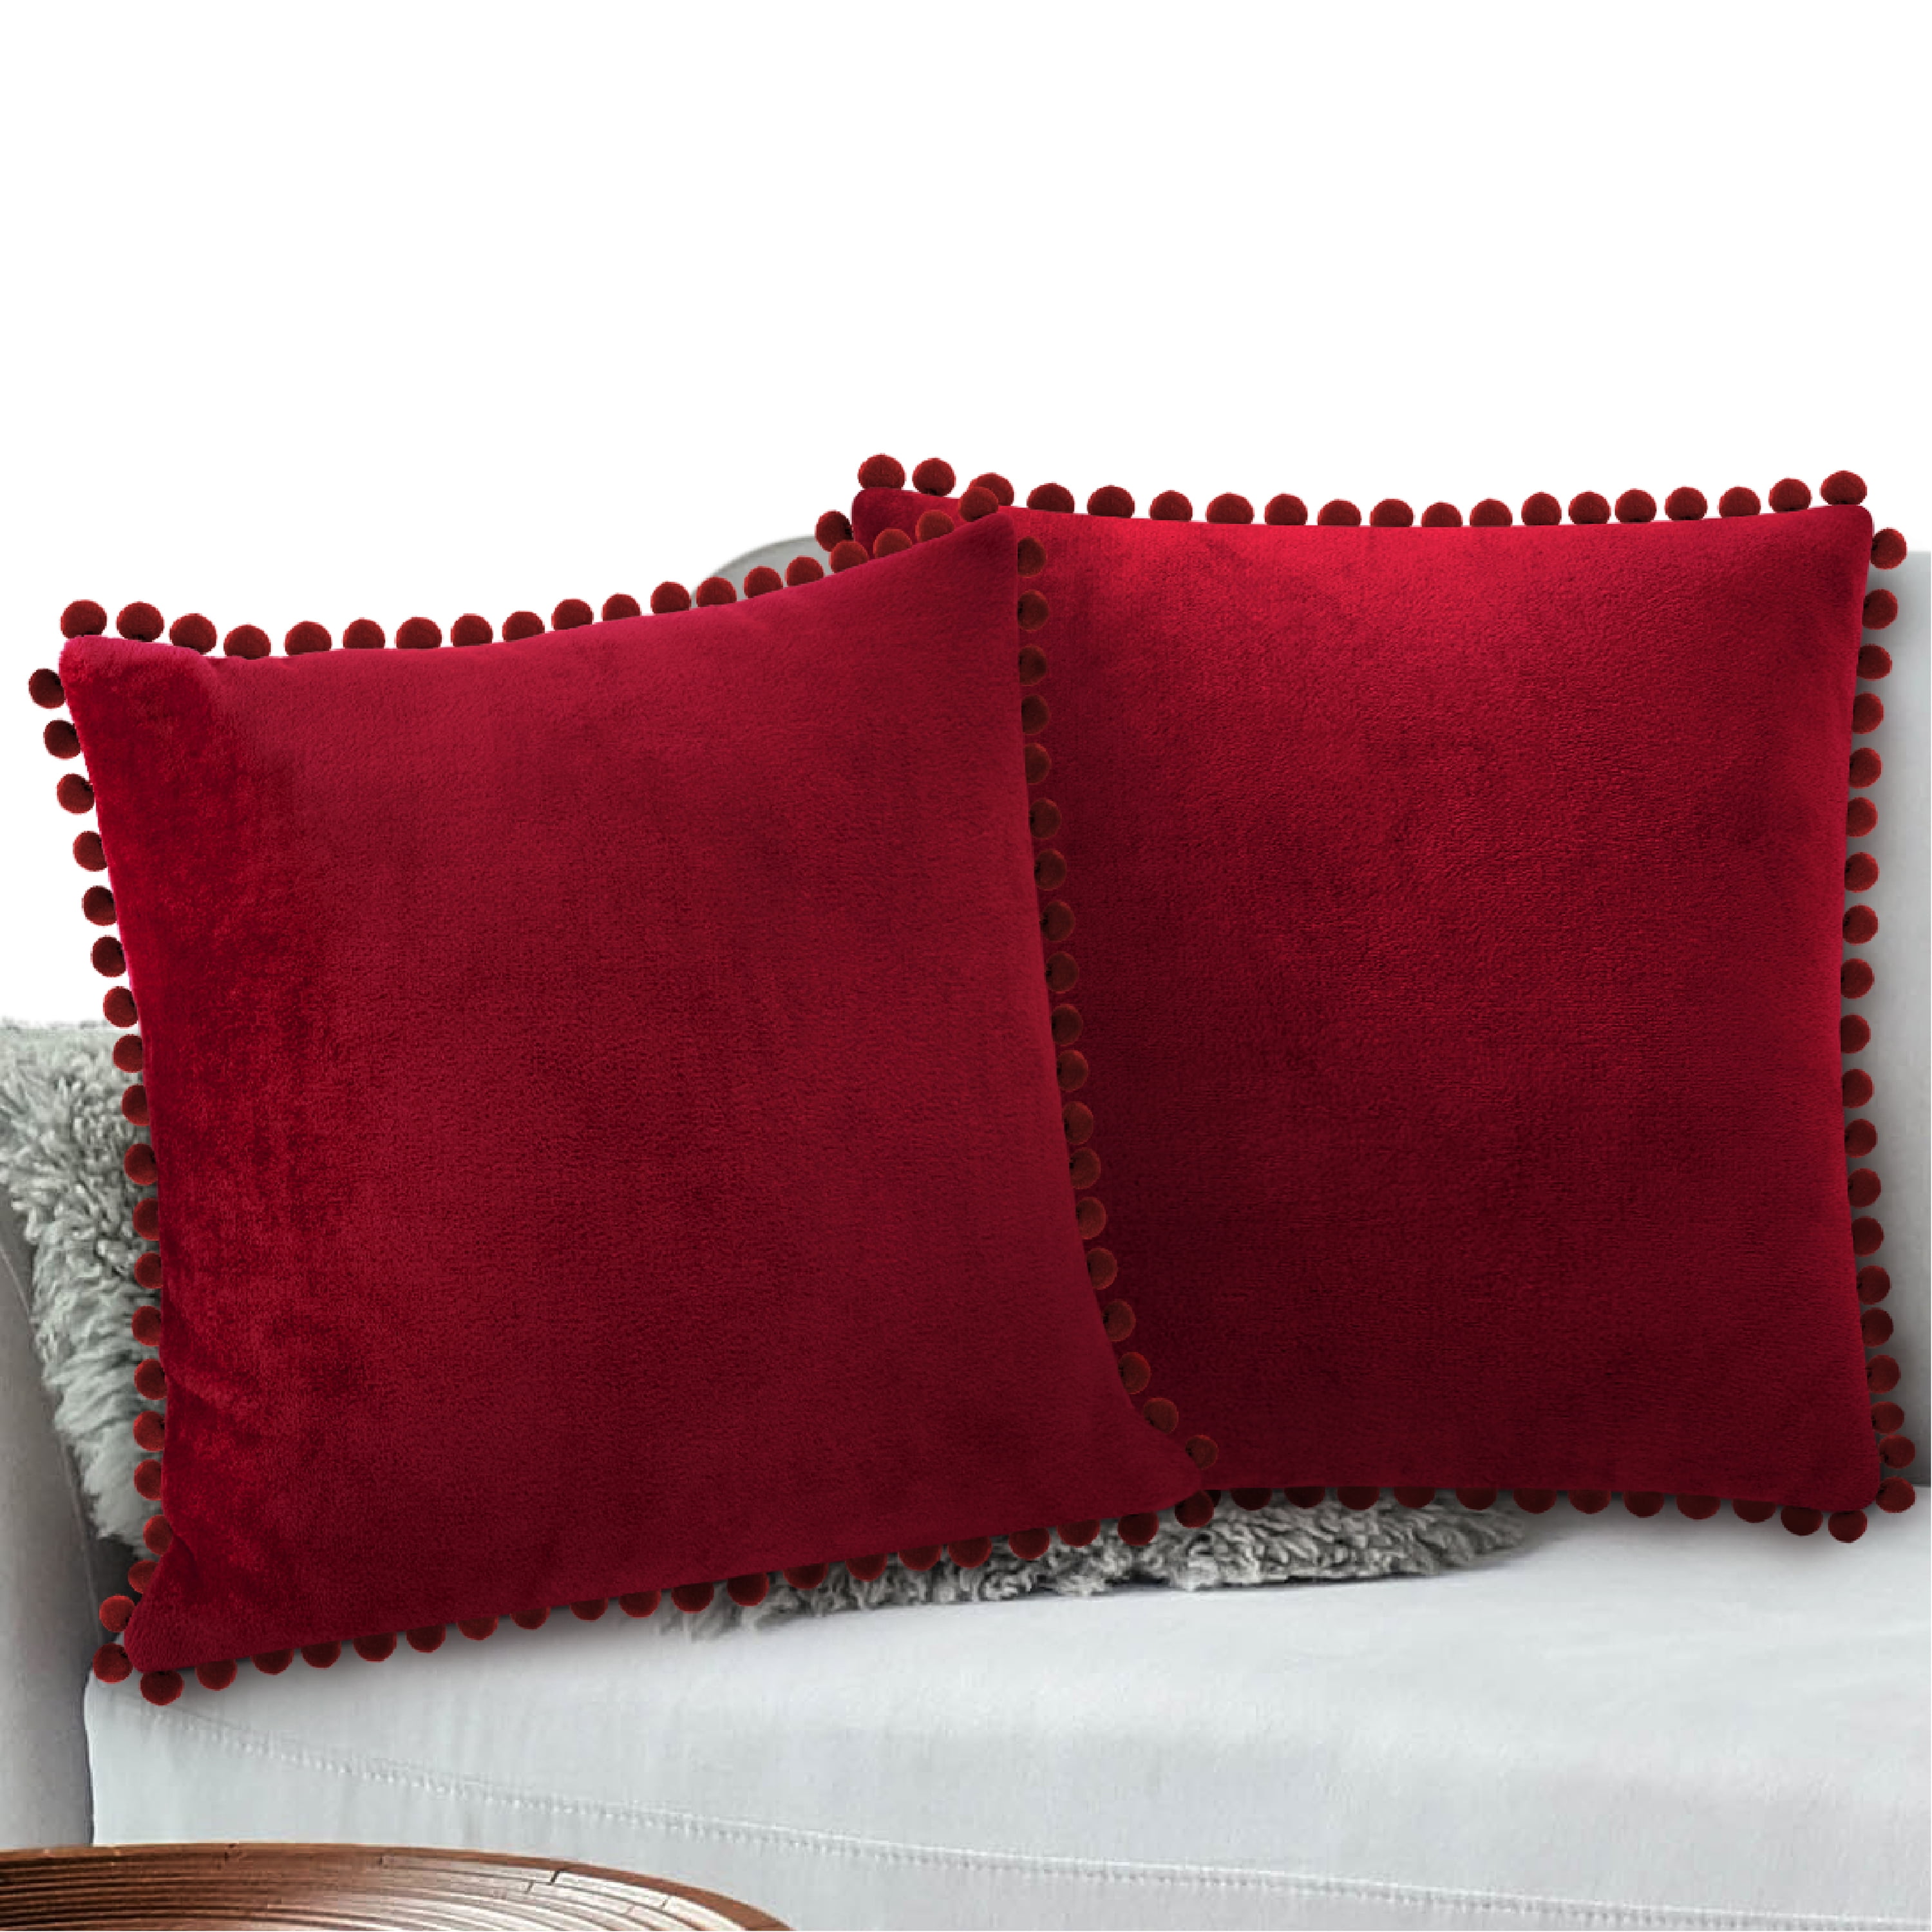 Cushion Covers for Sofa Couch Bed Set of 2 White Gold Pom Pom Velvet Leaves Pillows GIGIZAZA Decorative Throw Pillow Covers 18x18